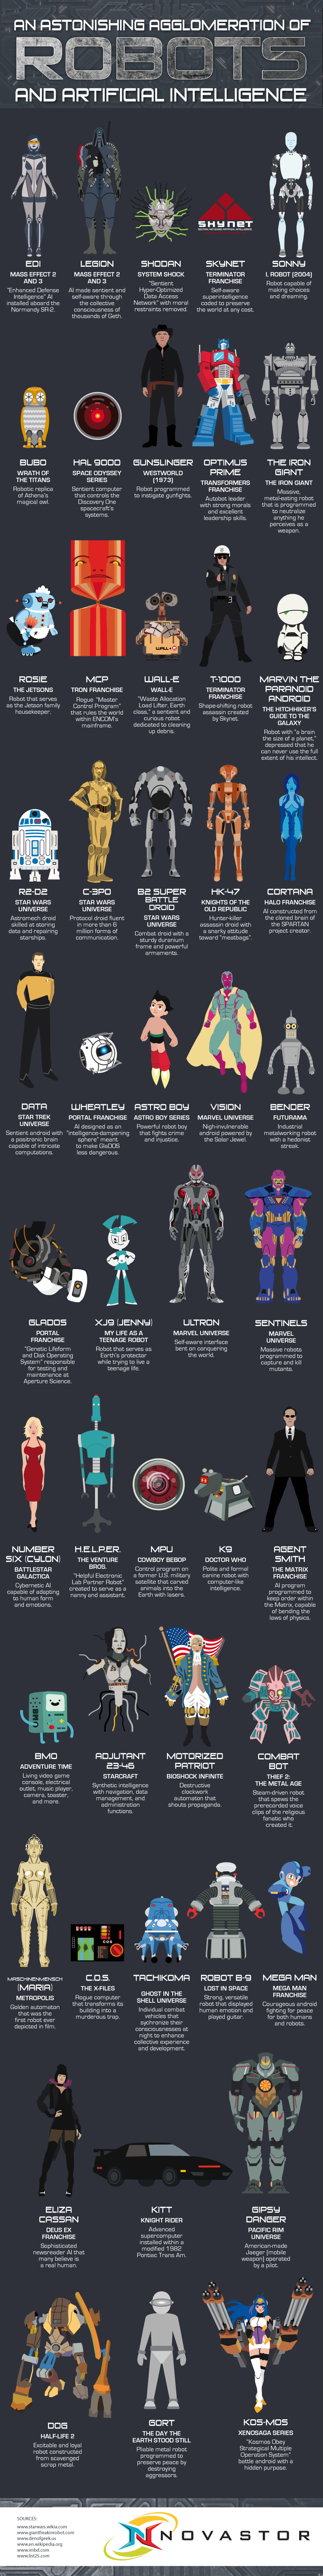 An Astonishing Agglomeration of Robots and Artificial Intelligence [Infographic]